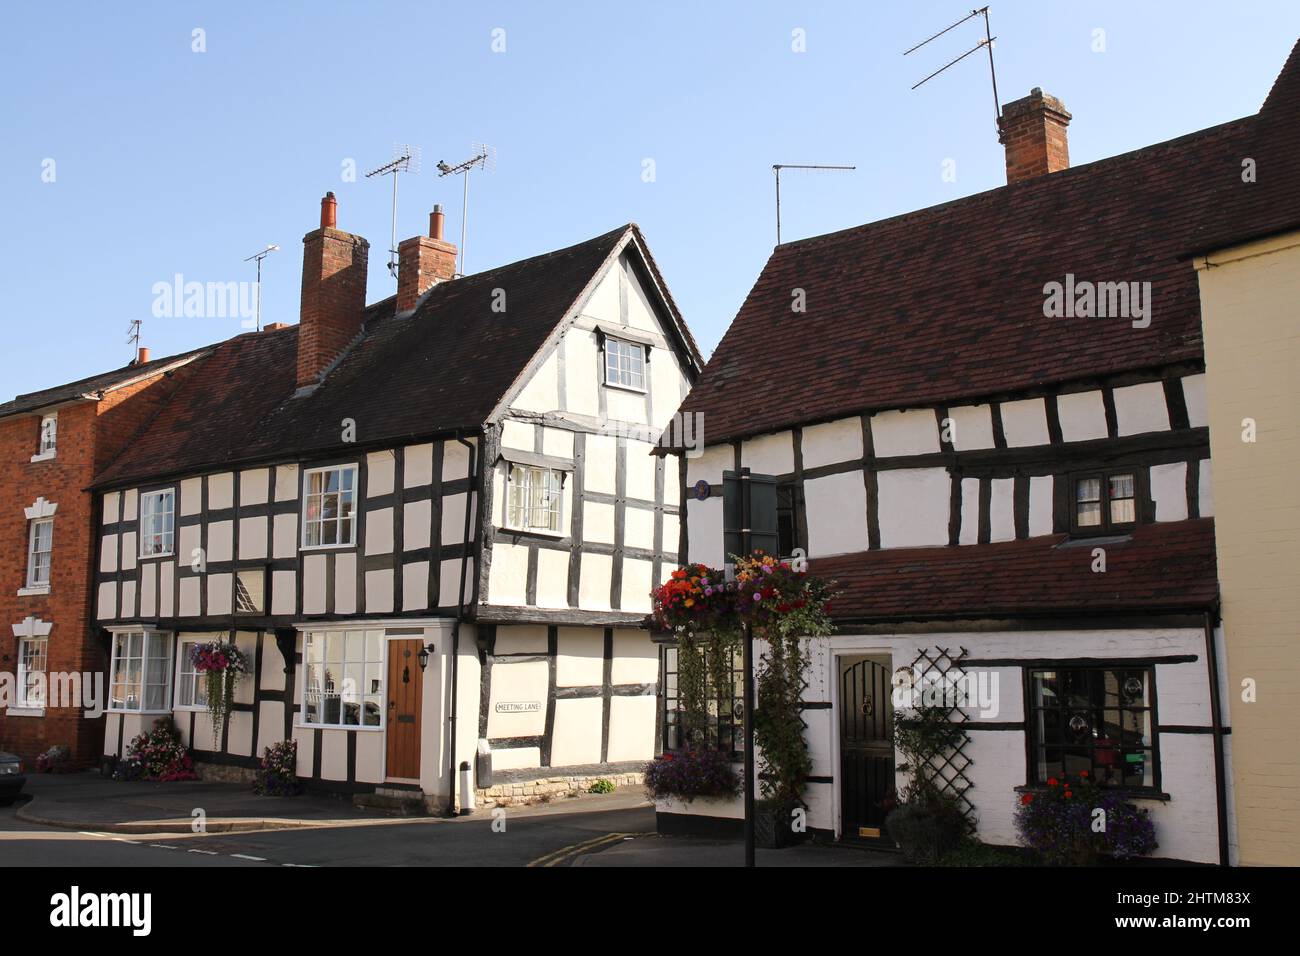 Black and white Half Timbered Houses in Alcester, Warwickshire, UK. Shakespeare's country, with blue sky in the summer. Stock Photo